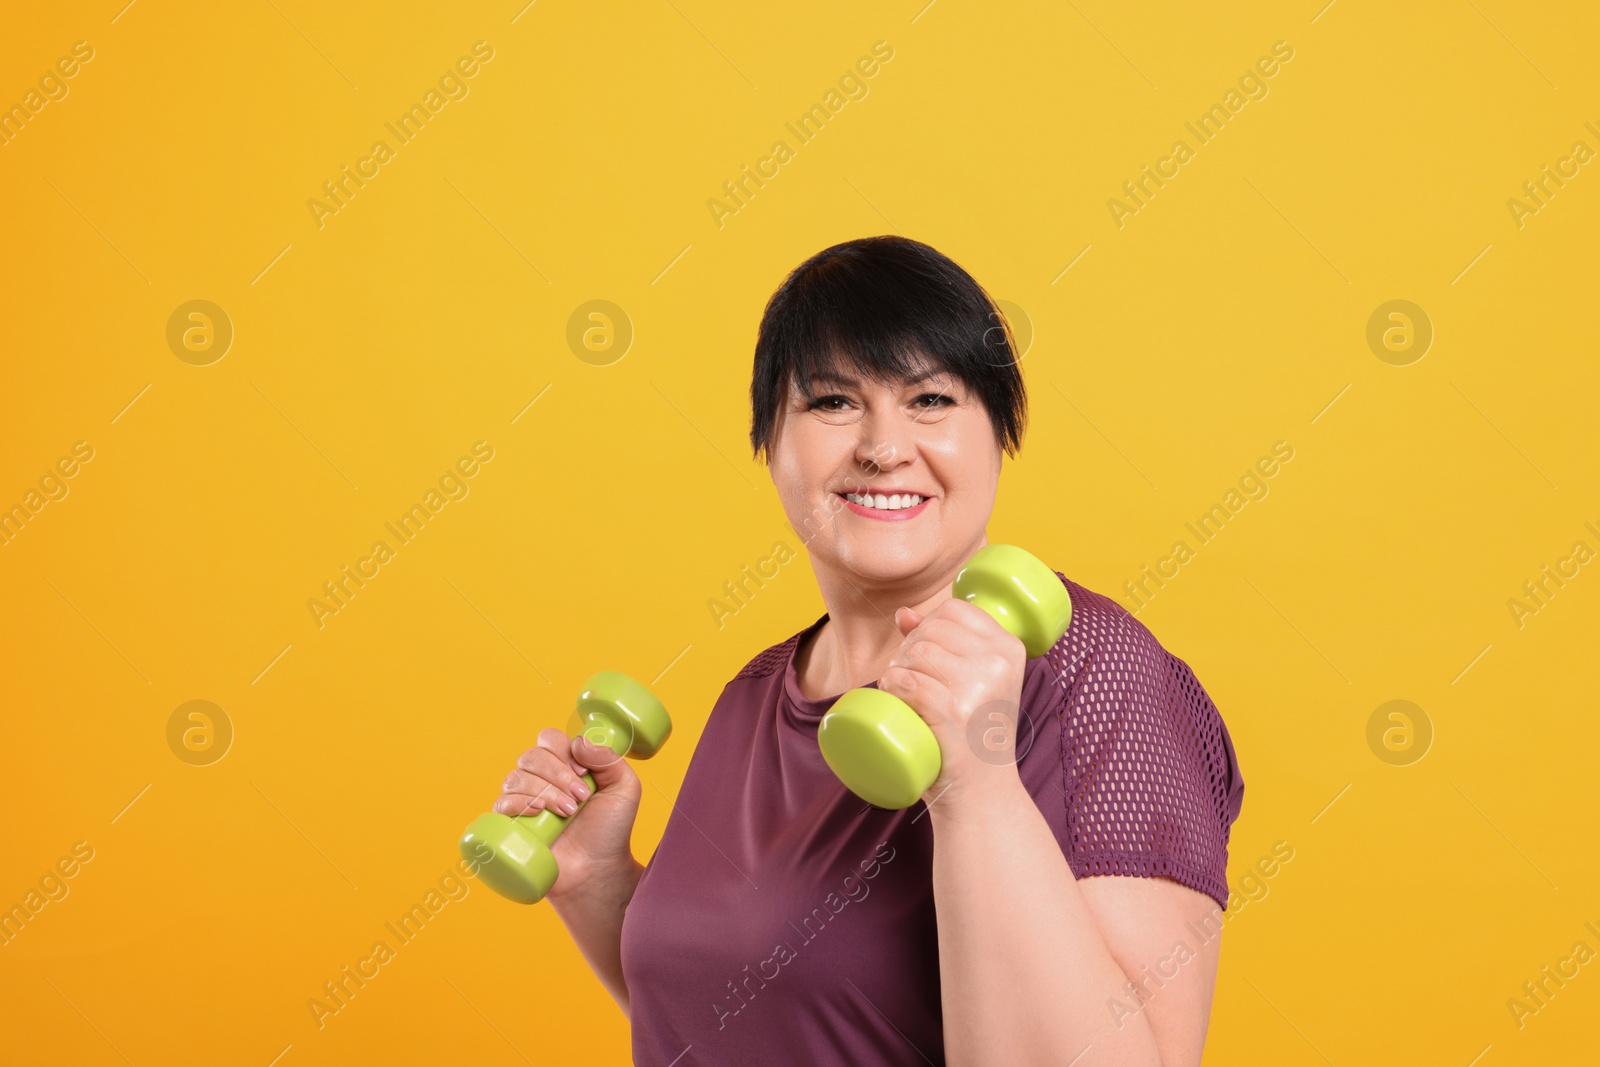 Photo of Happy overweight mature woman doing exercise with dumbbells on orange background